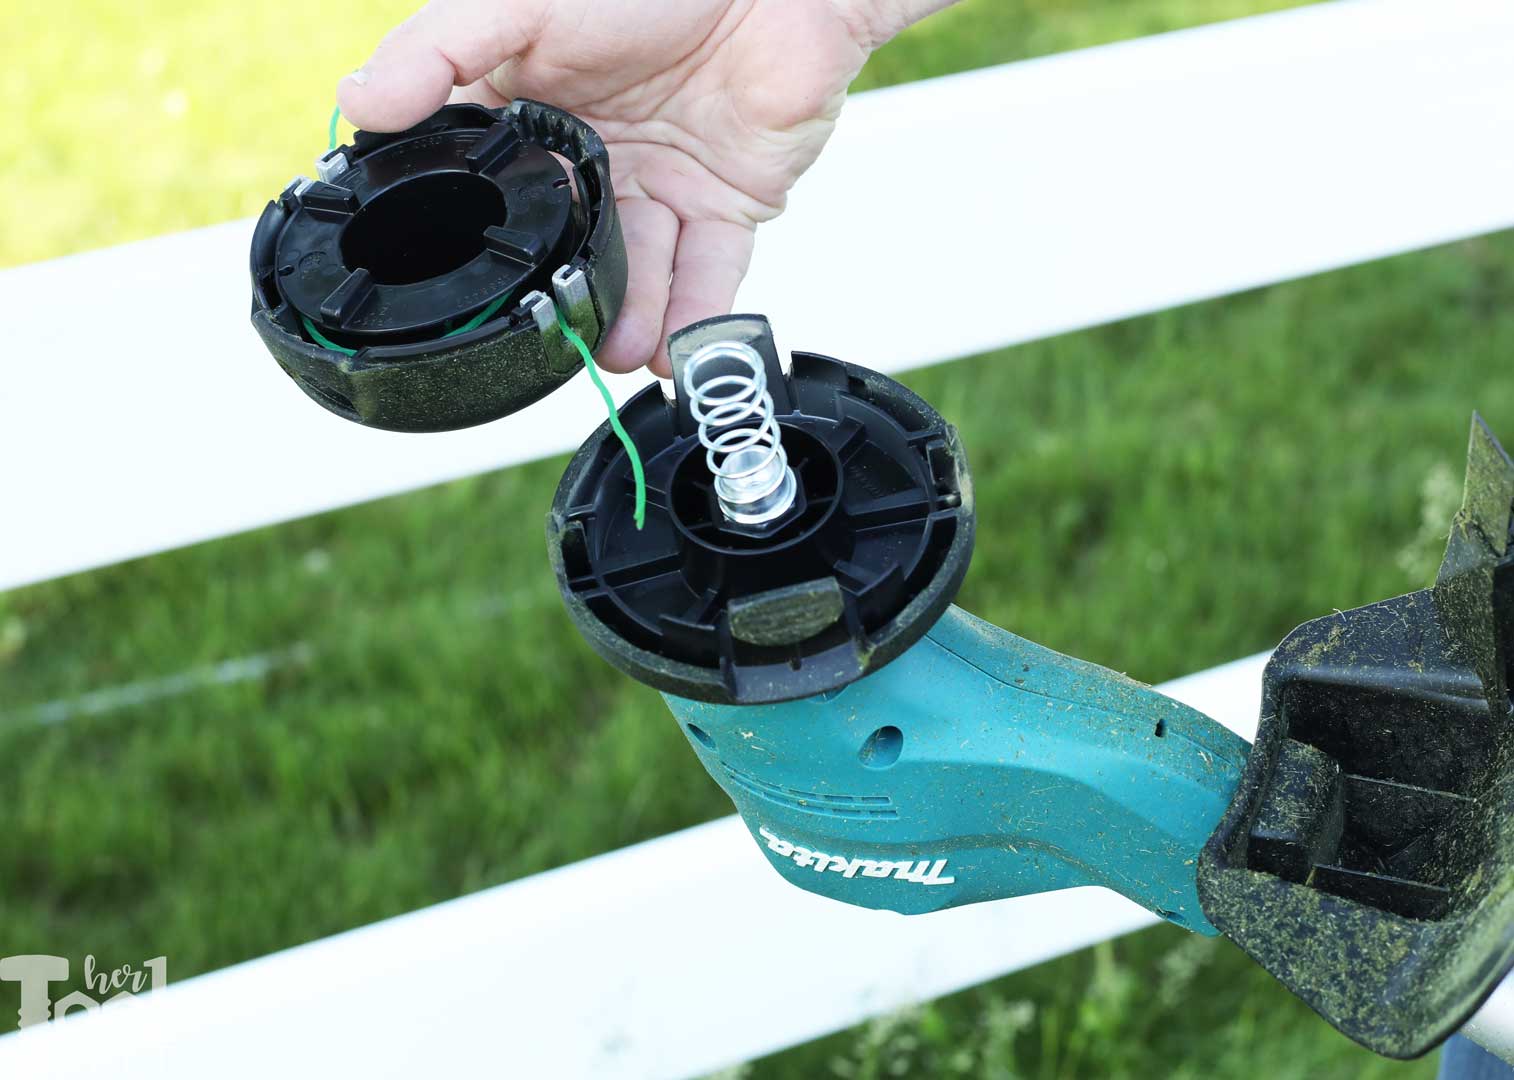 How to Restring a Makita Weed Eater